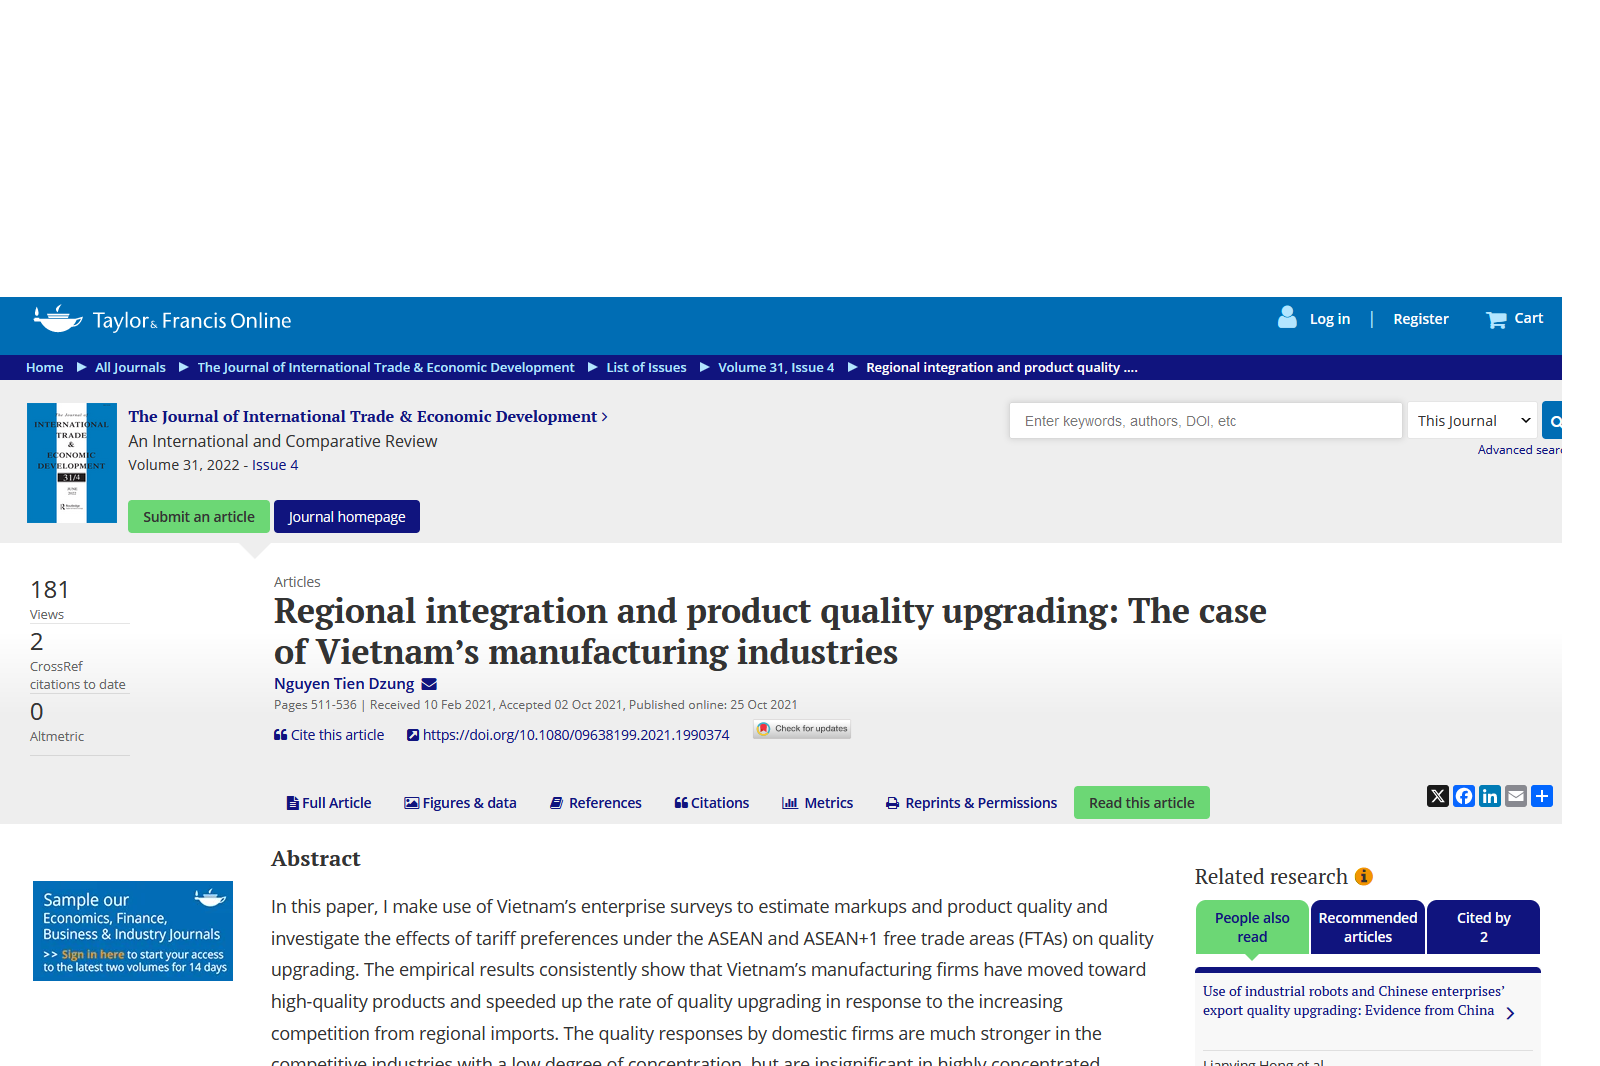 Regional Integration and Product Quality Upgrading: The Case of Vietnam Manufacturing Industries